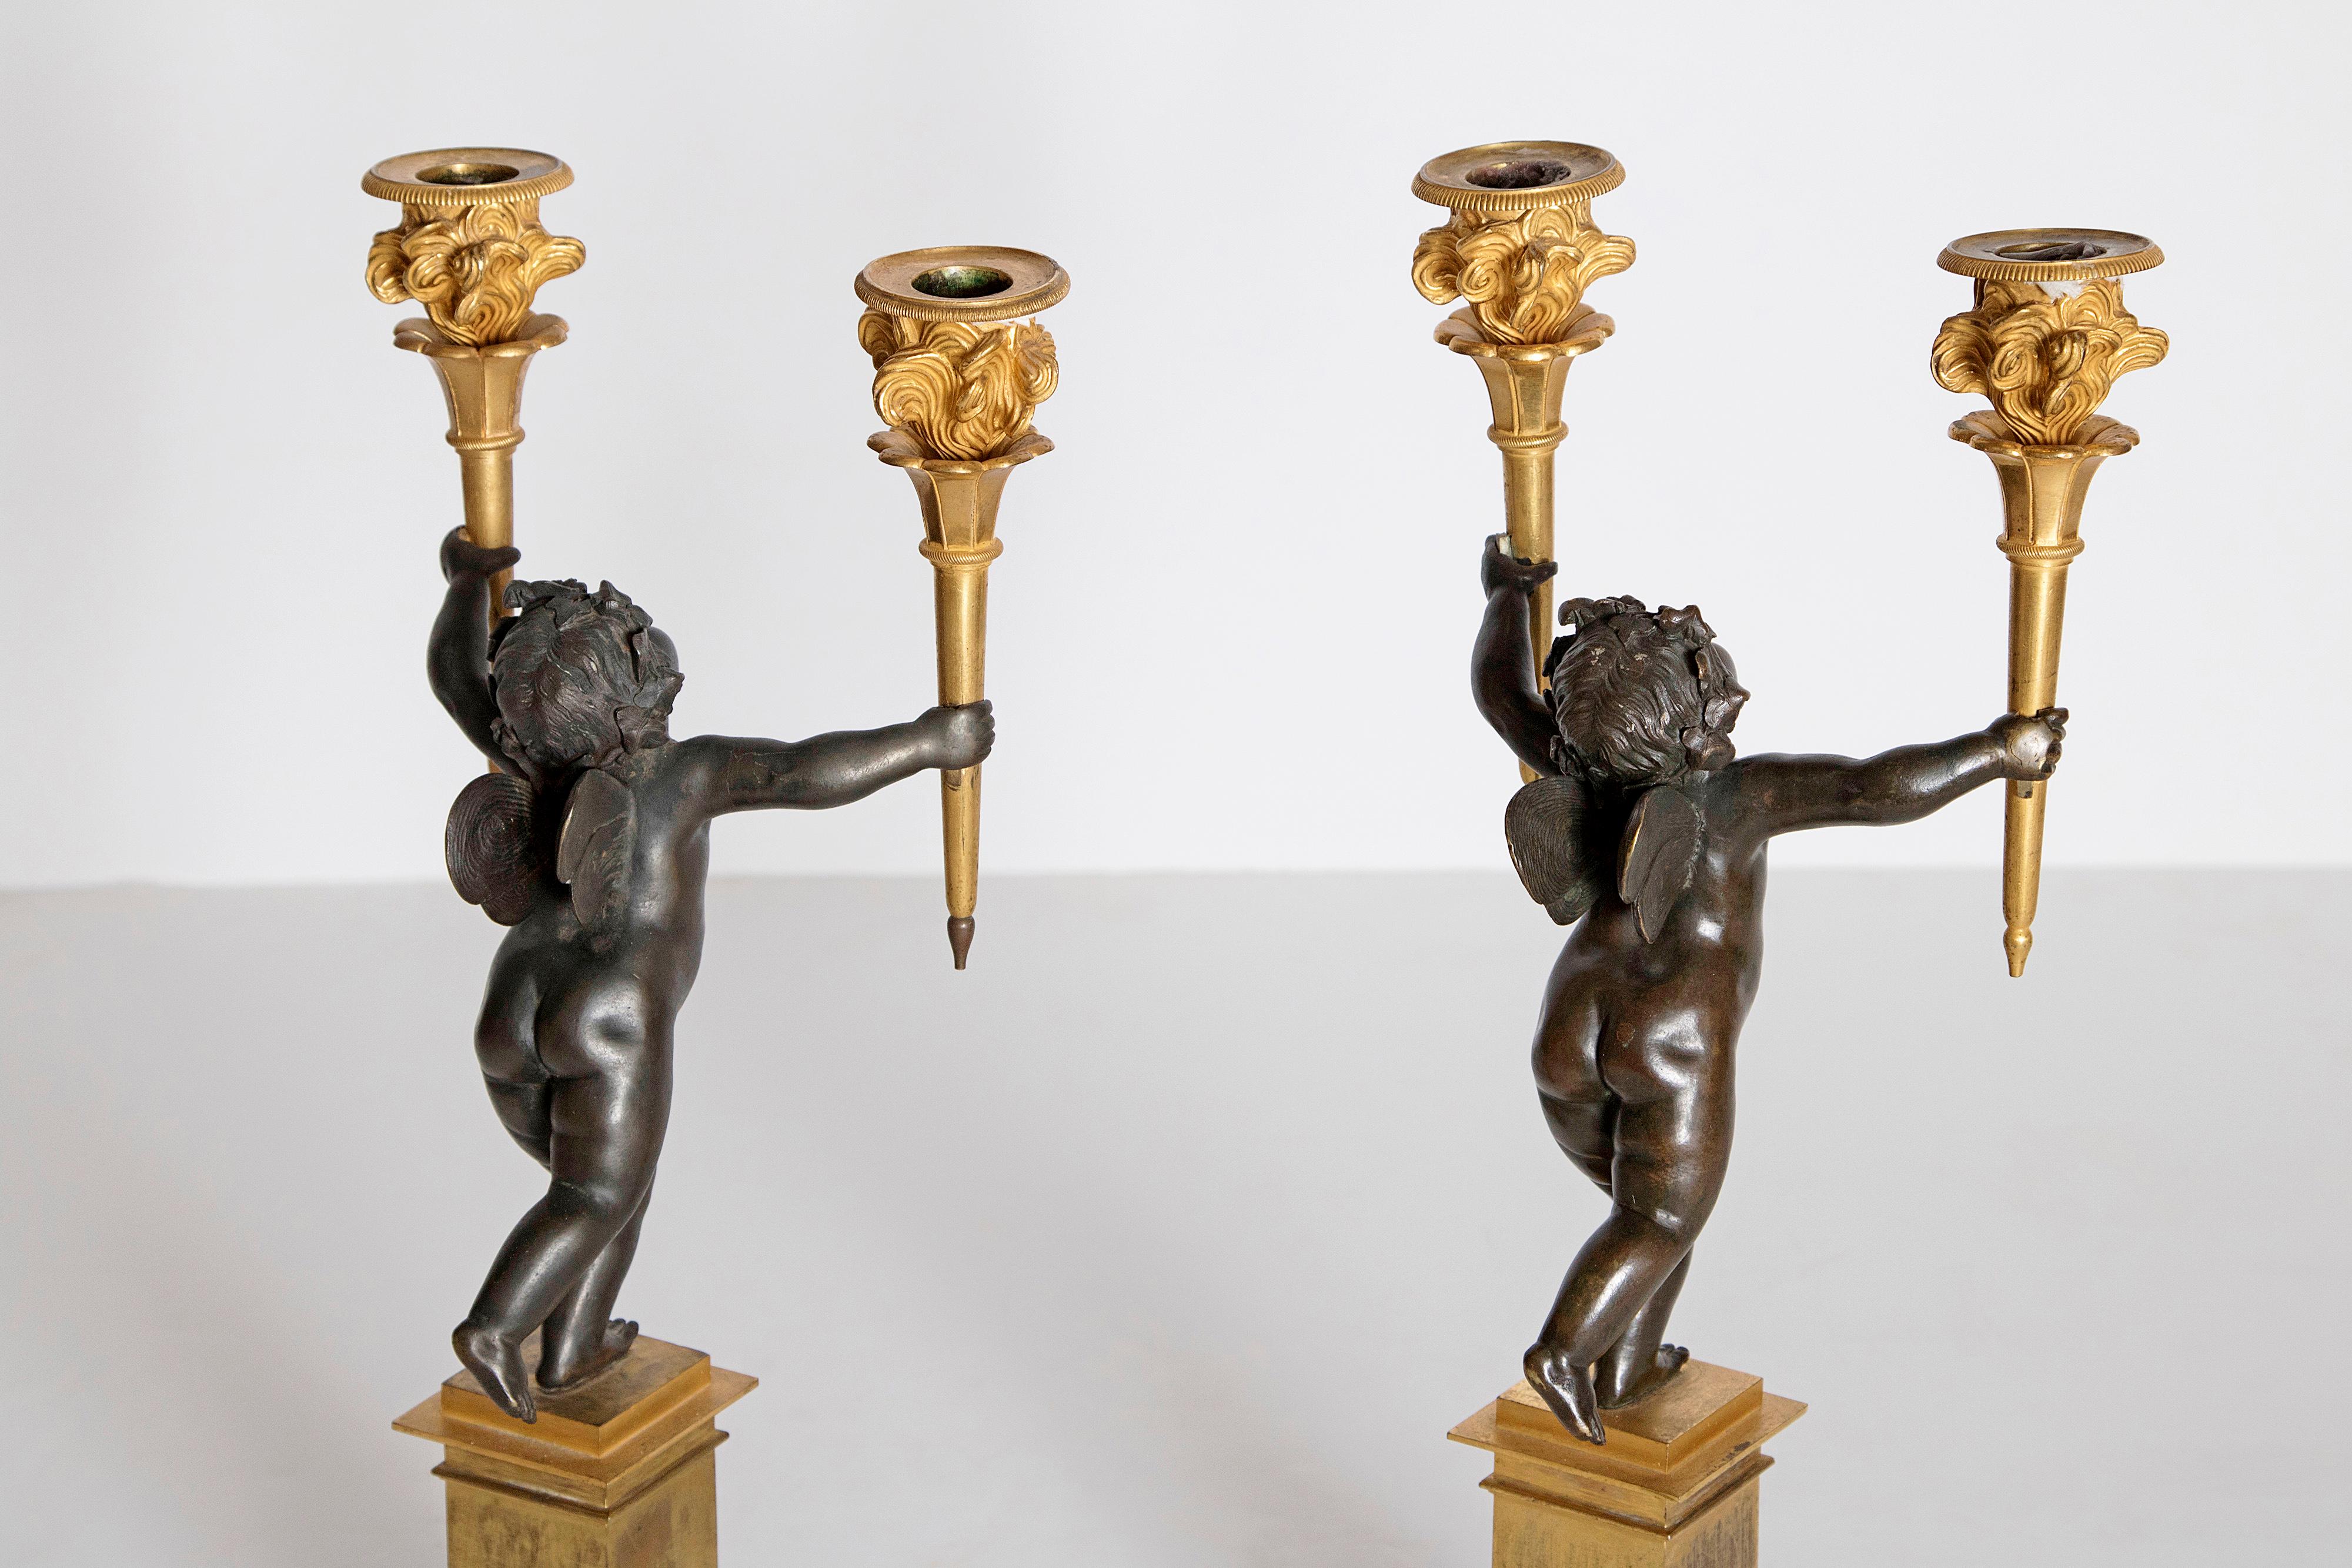 Pair of French Charles X Patinated Bronze and Gilt Figurative Candelabras For Sale 3